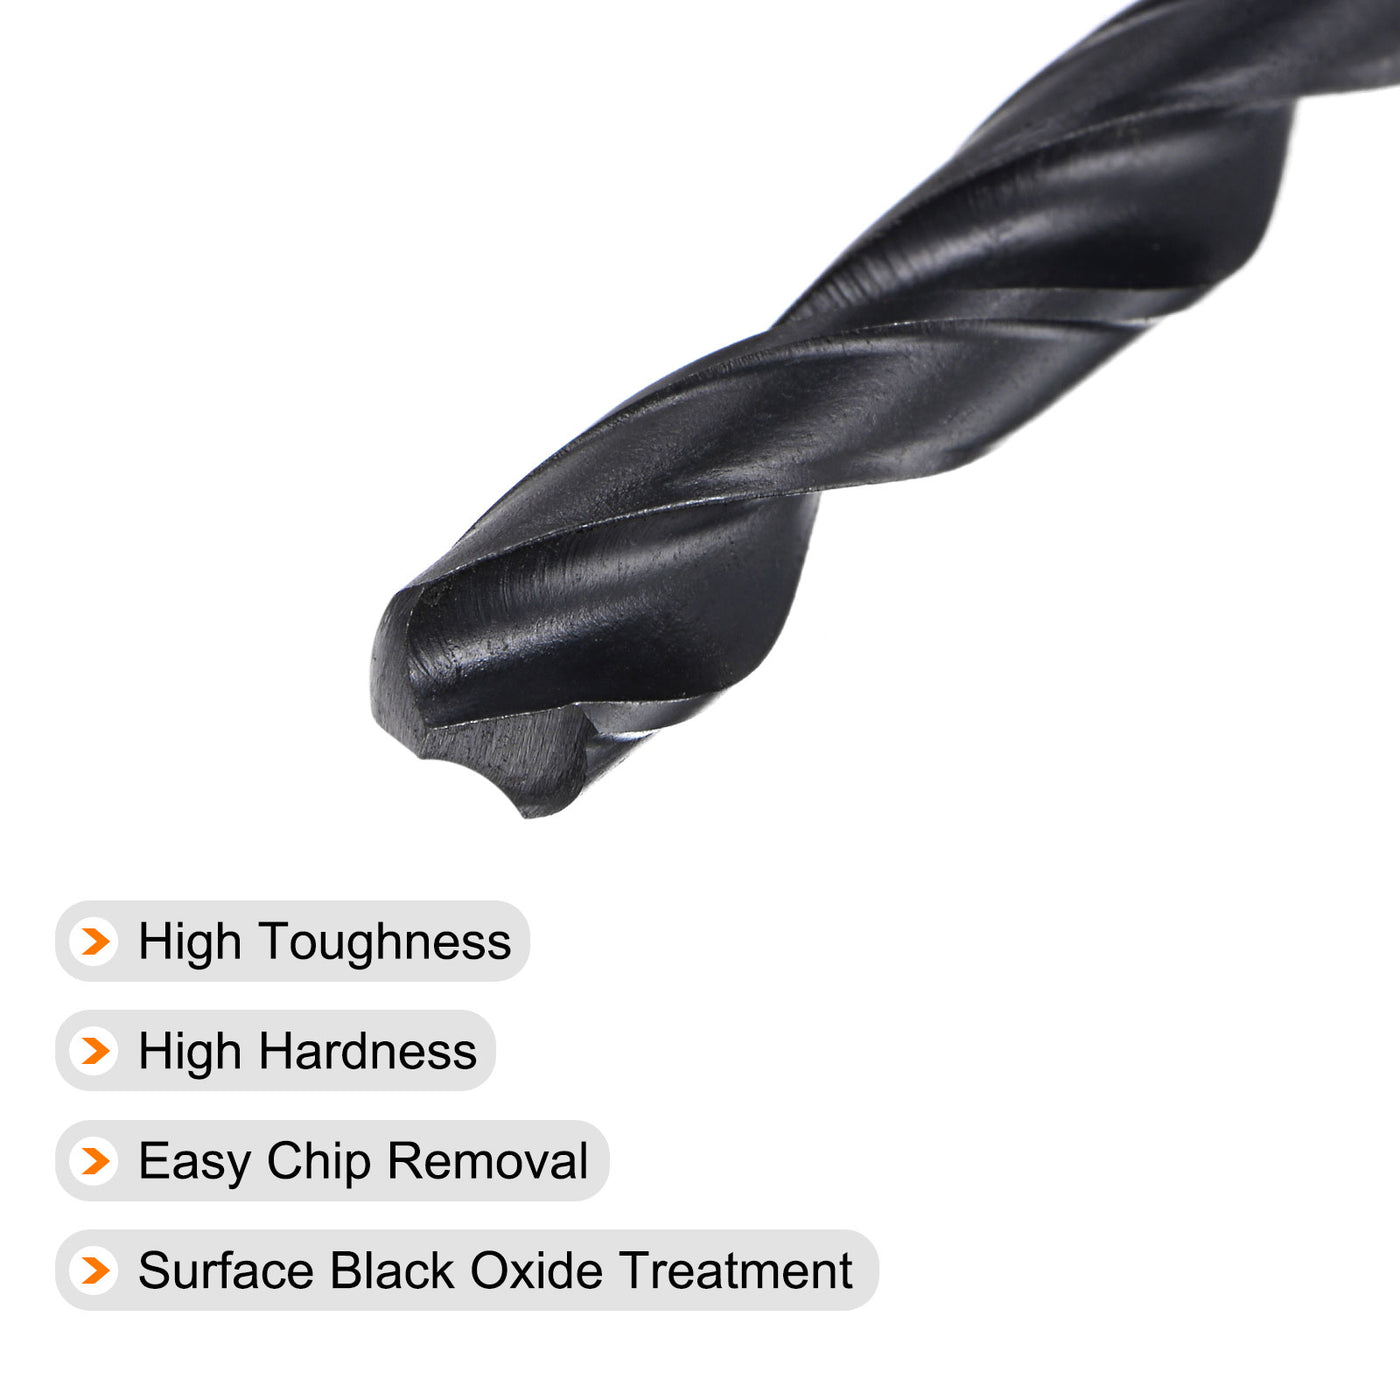 uxcell Uxcell High Speed Steel Twist Drill Bit, 8.8mm Fully Ground Black Oxide 123mm Long 4Pcs